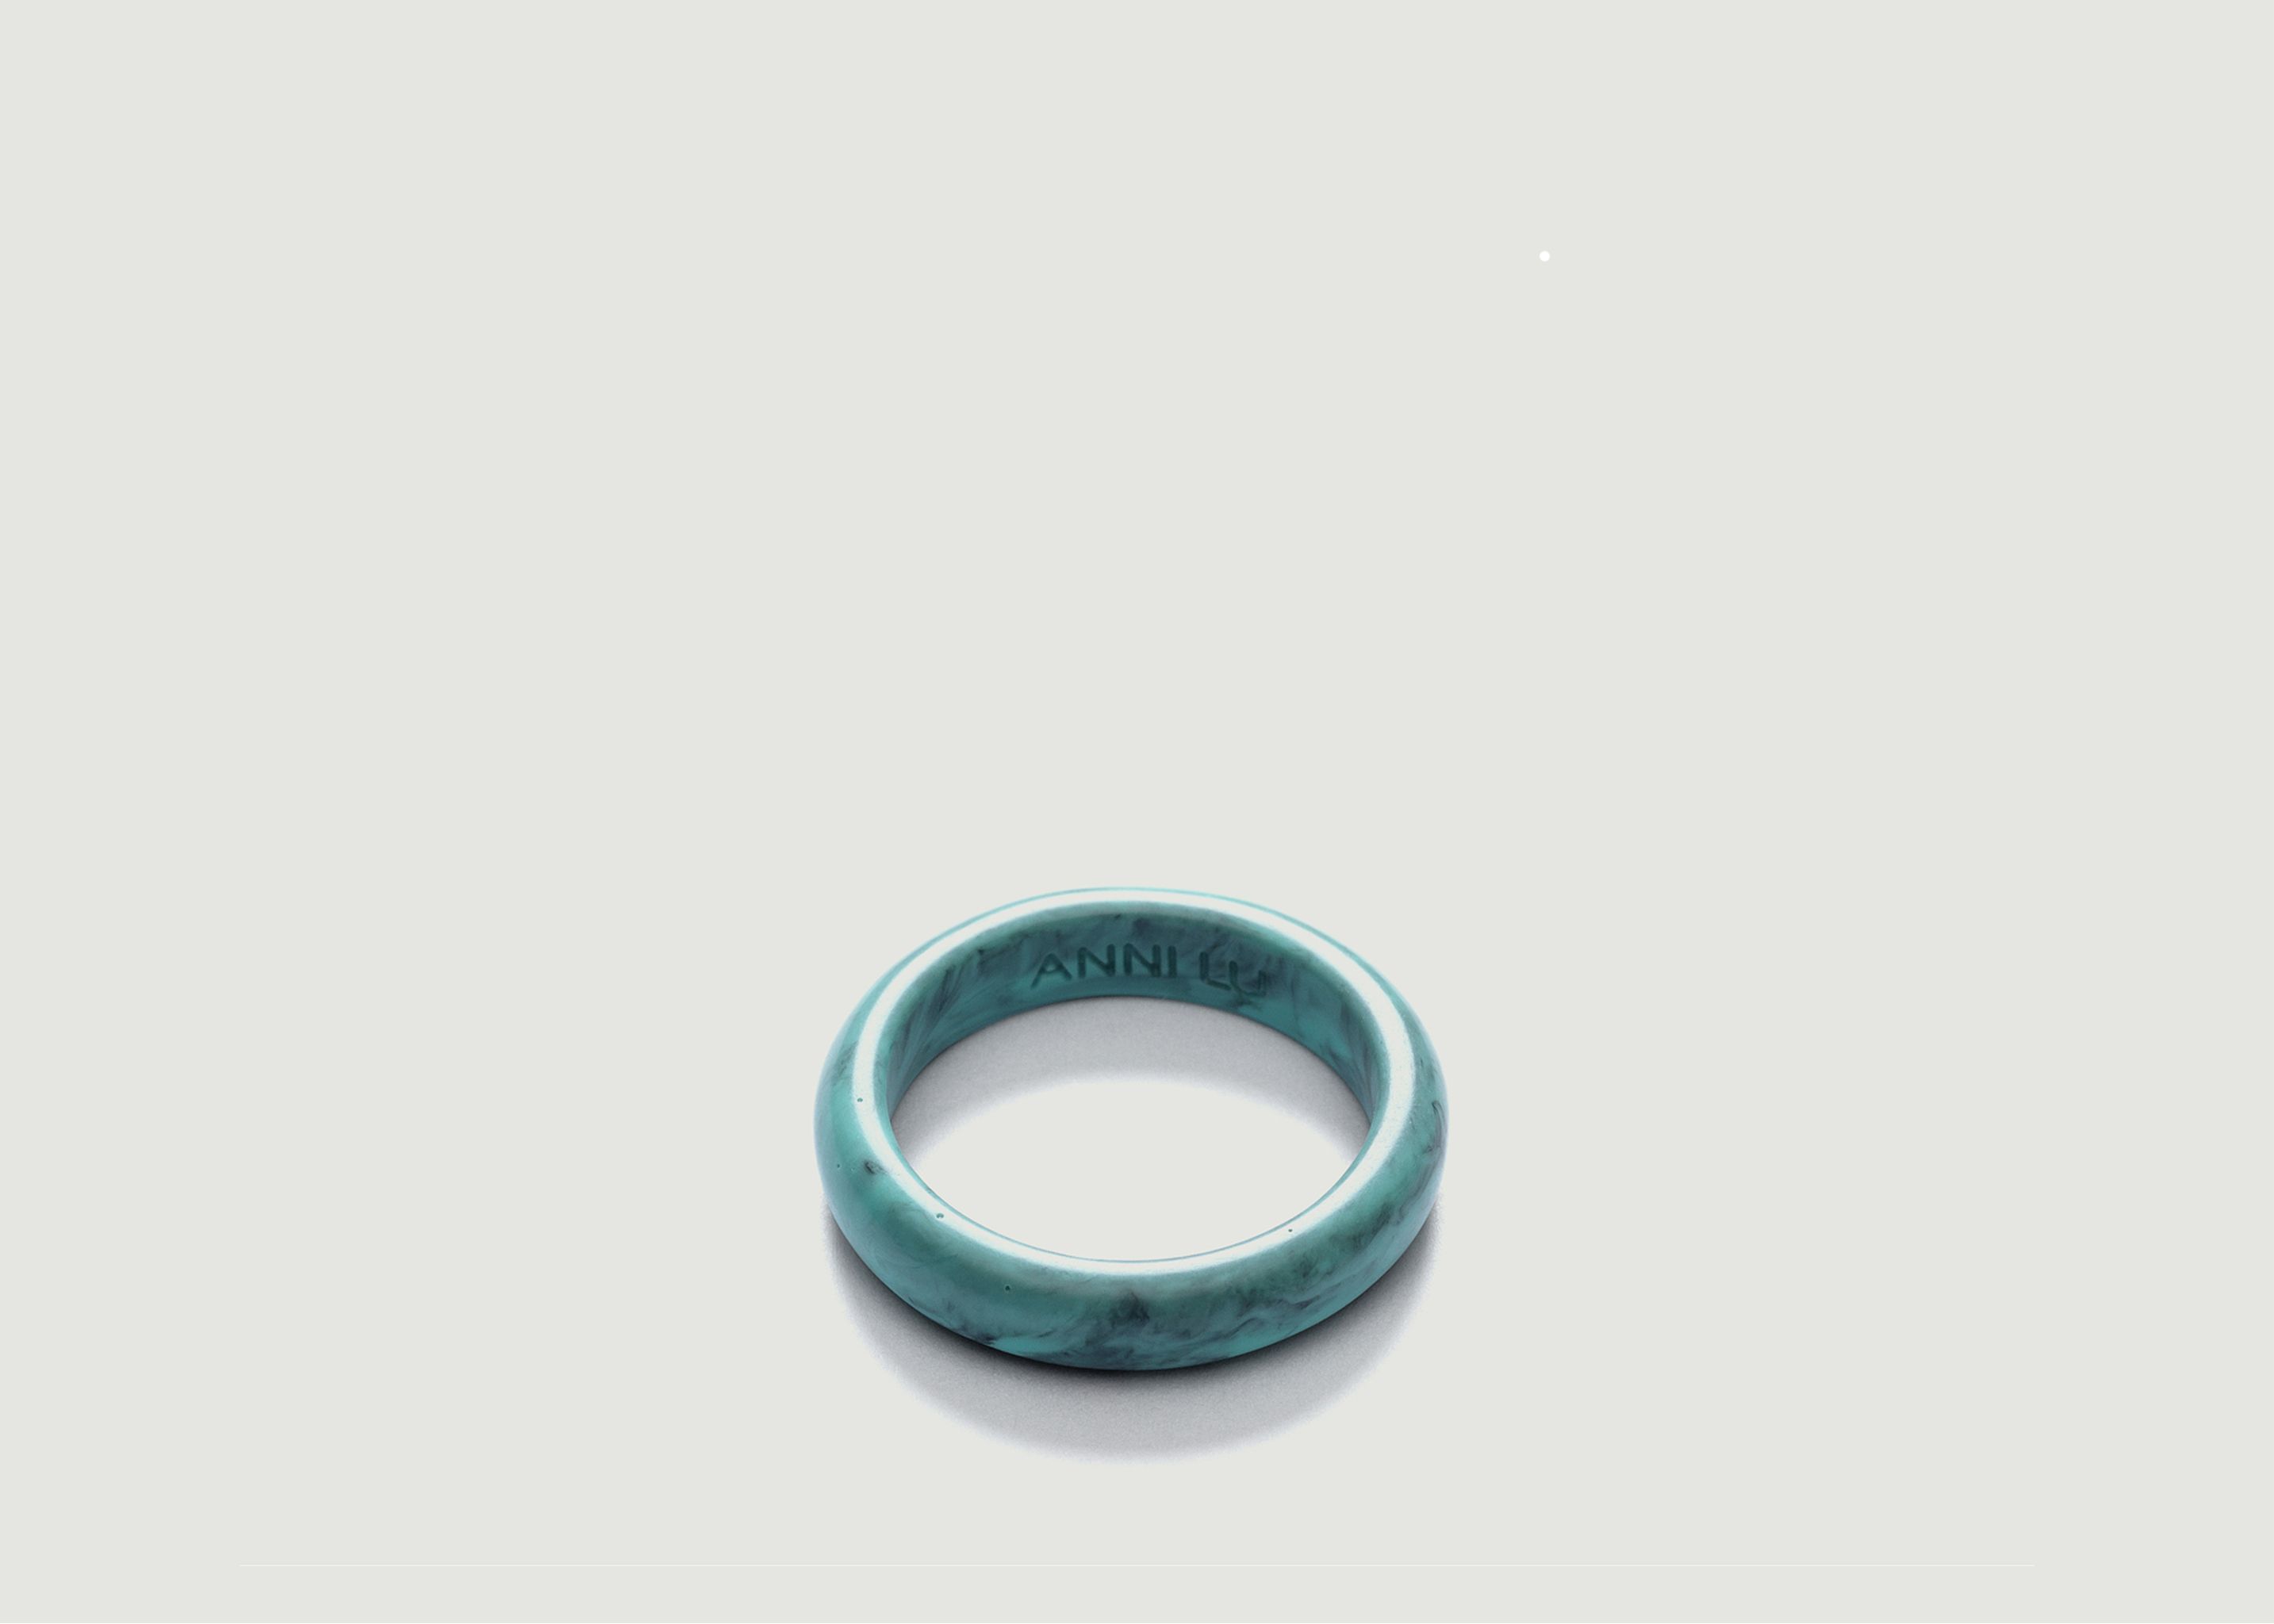 Belize turquoise effect ring - Anni Lu